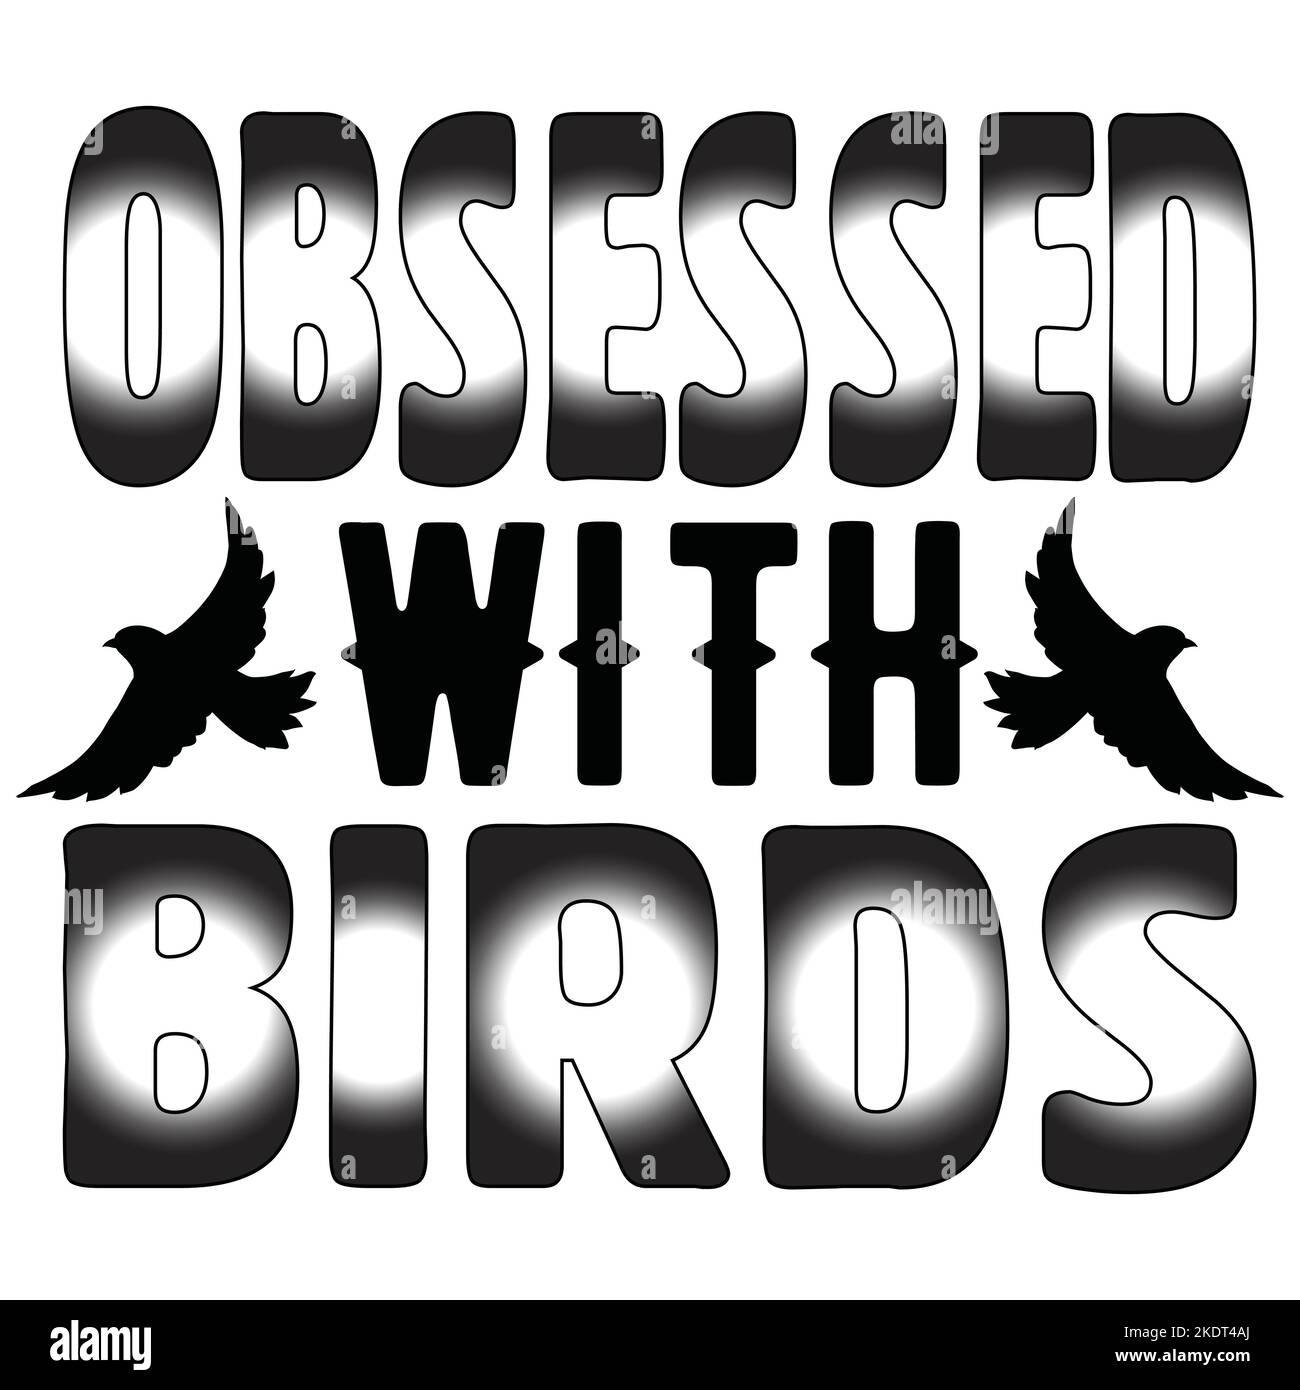 Obsessed With Brids Stock Vector